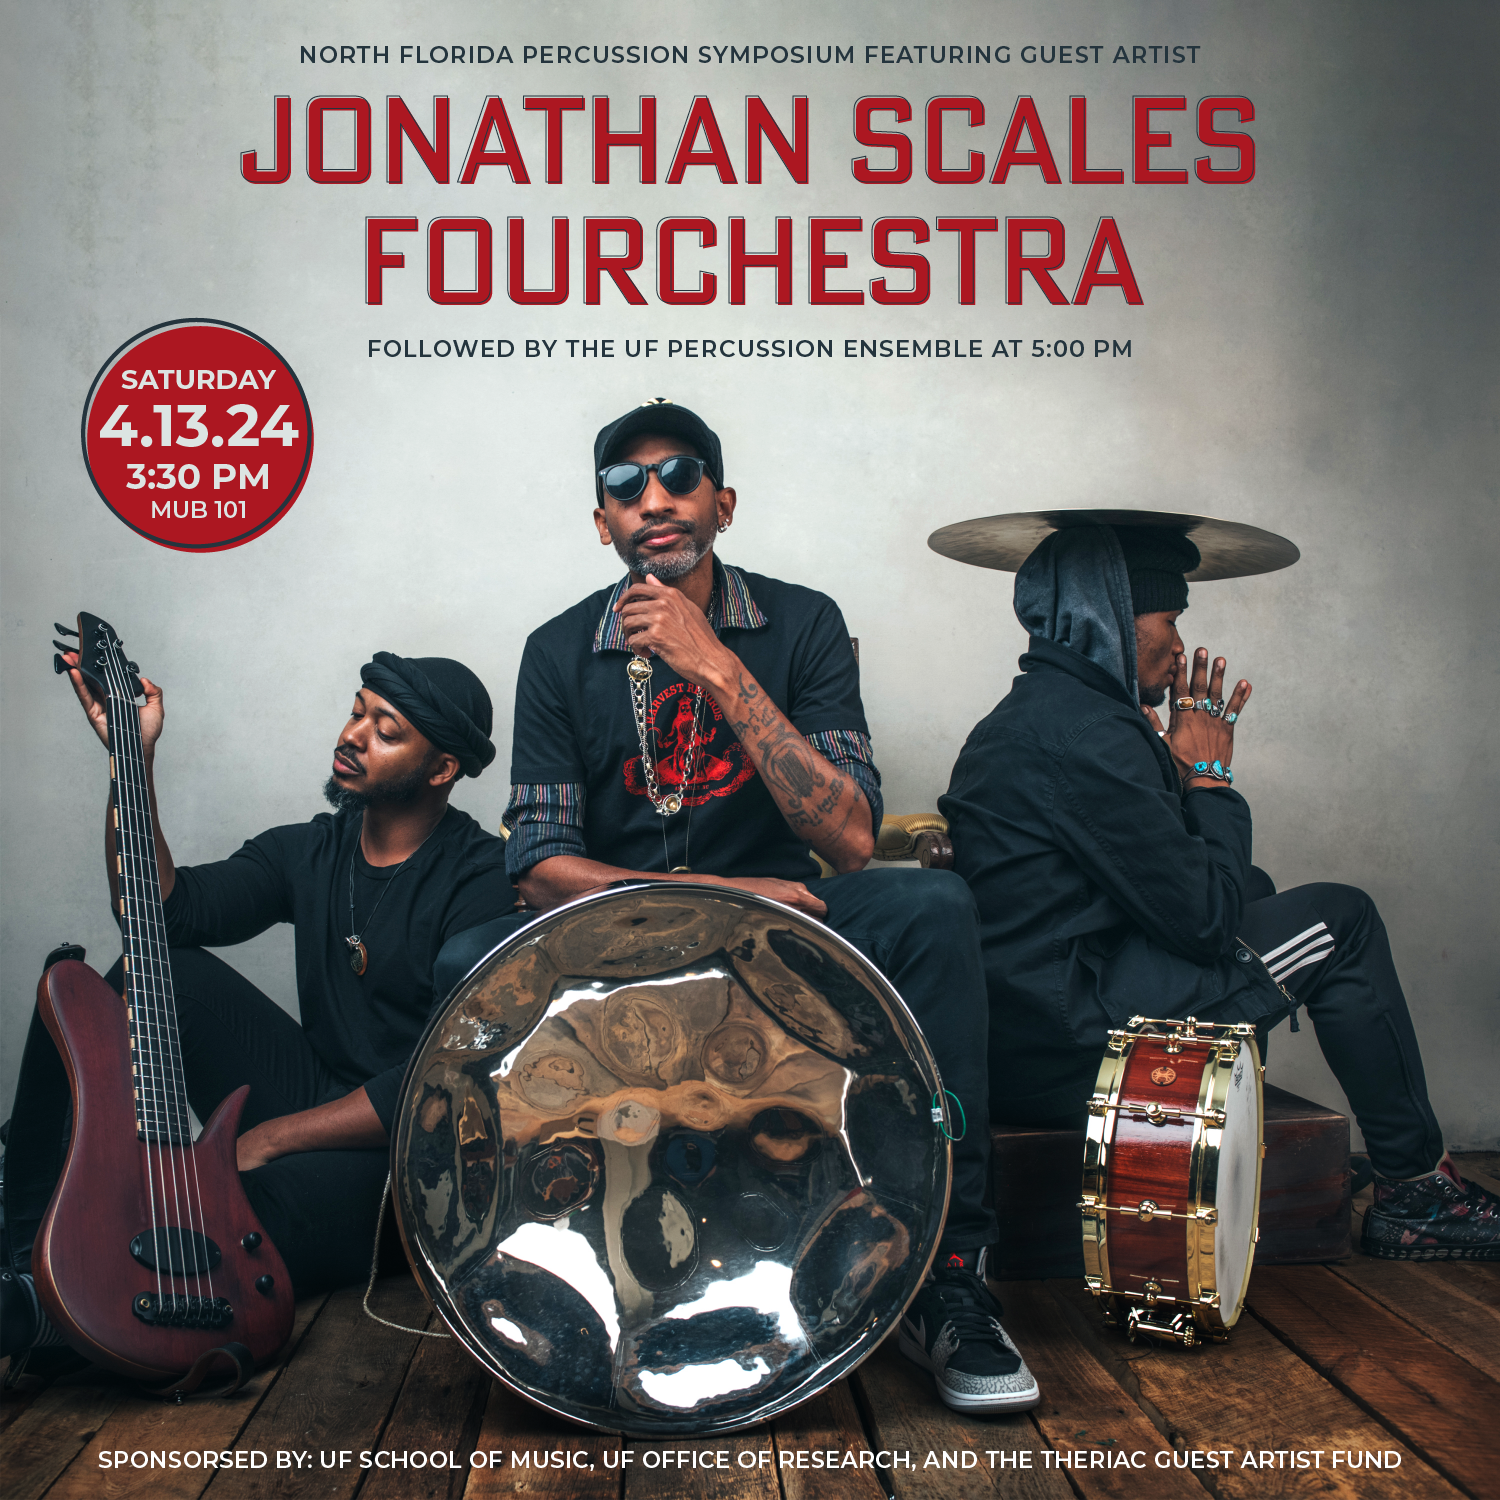 Johnathan Scales Fourchestra